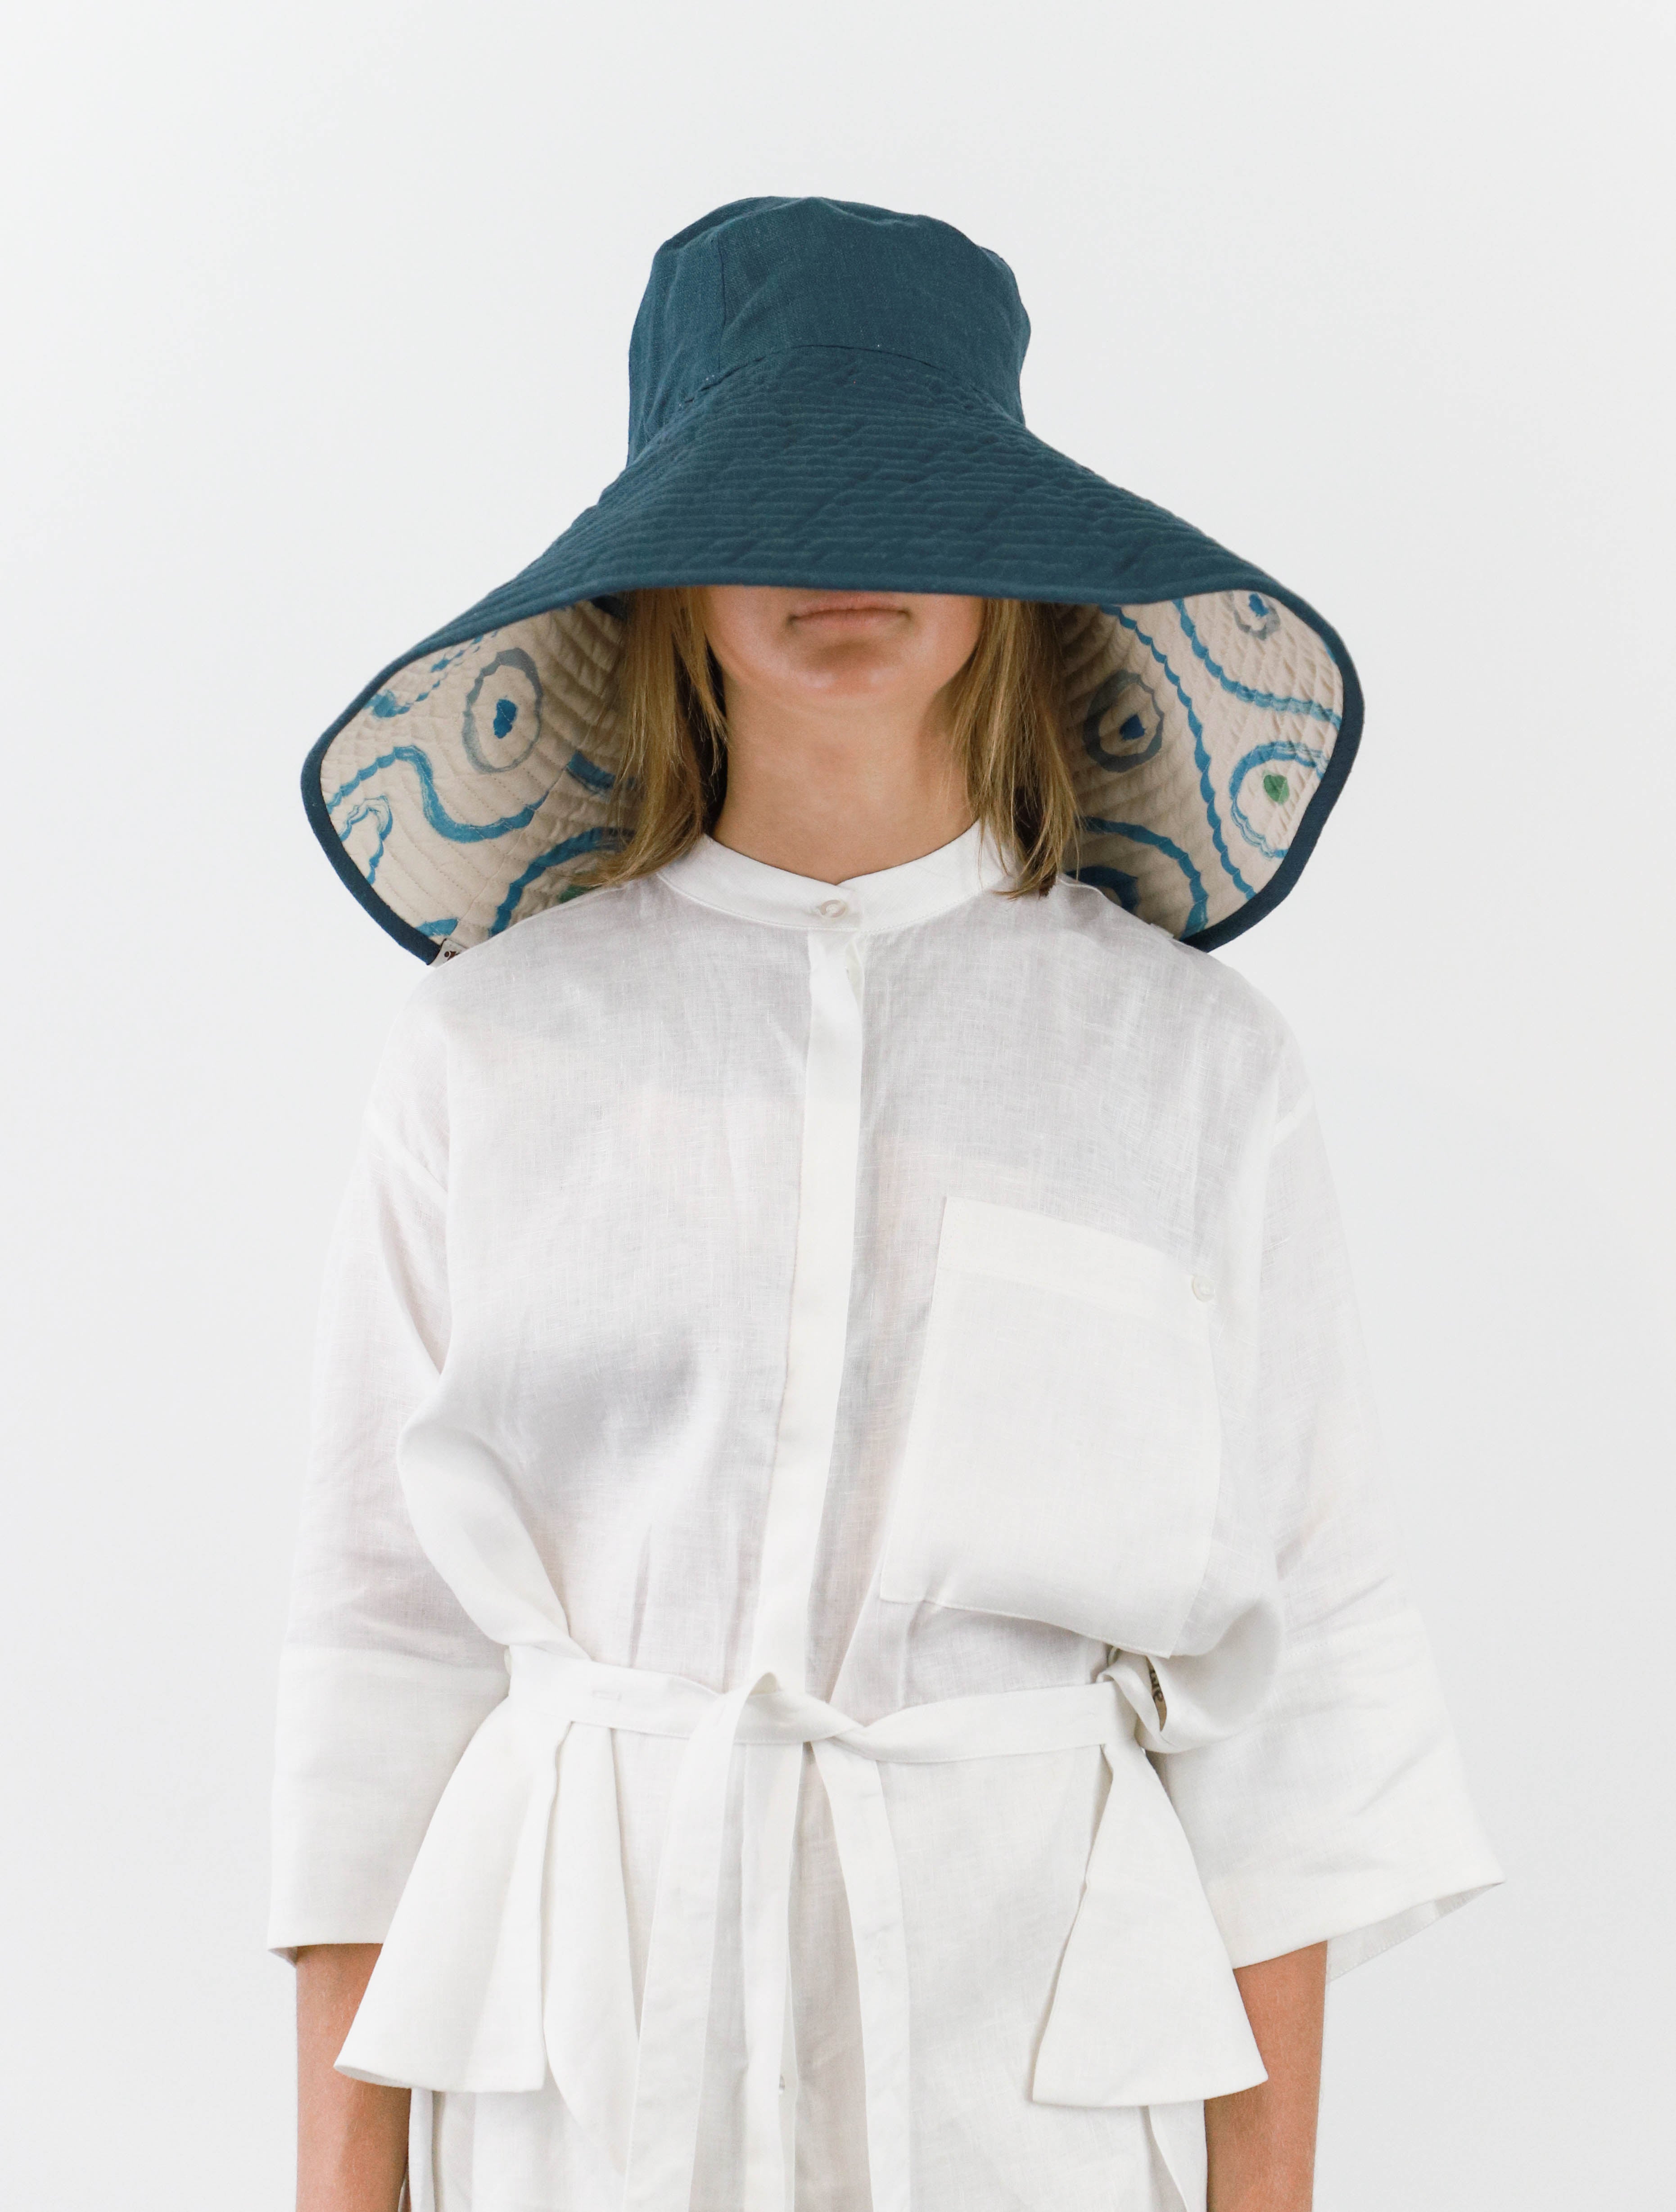 Romualda Baboomba Grande bucket hat with blue and white swirl print shown on model worn inside out with blue lining